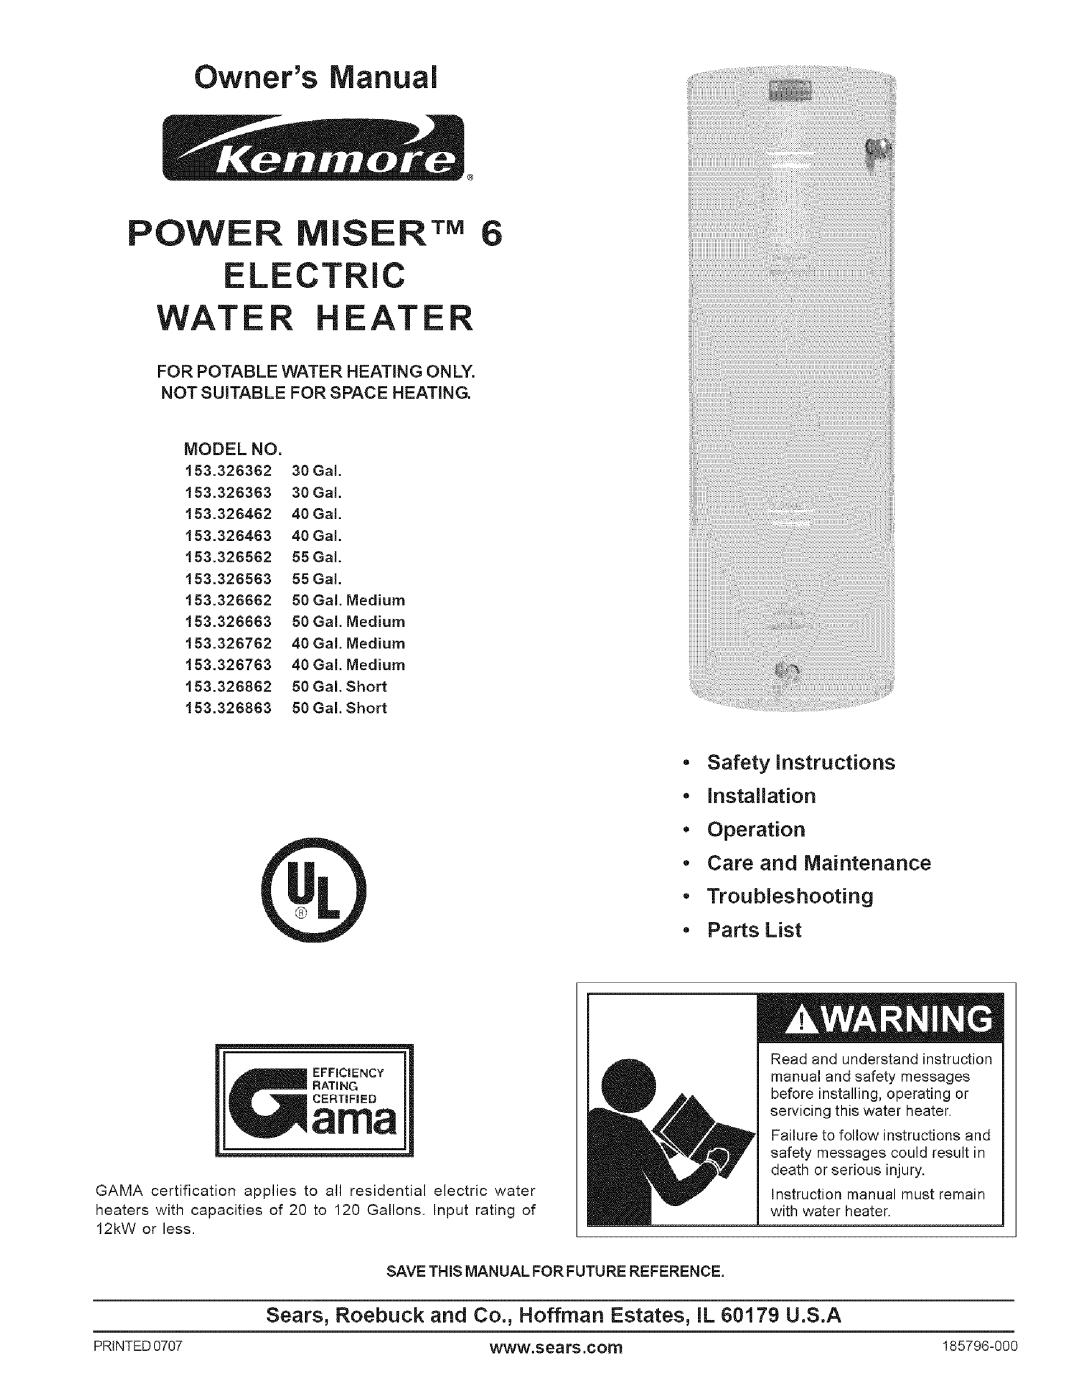 Kenmore 326862 50 GAL owner manual Electric, Power Misertm, Water Heater, Safety instructions * Installation, Model No 